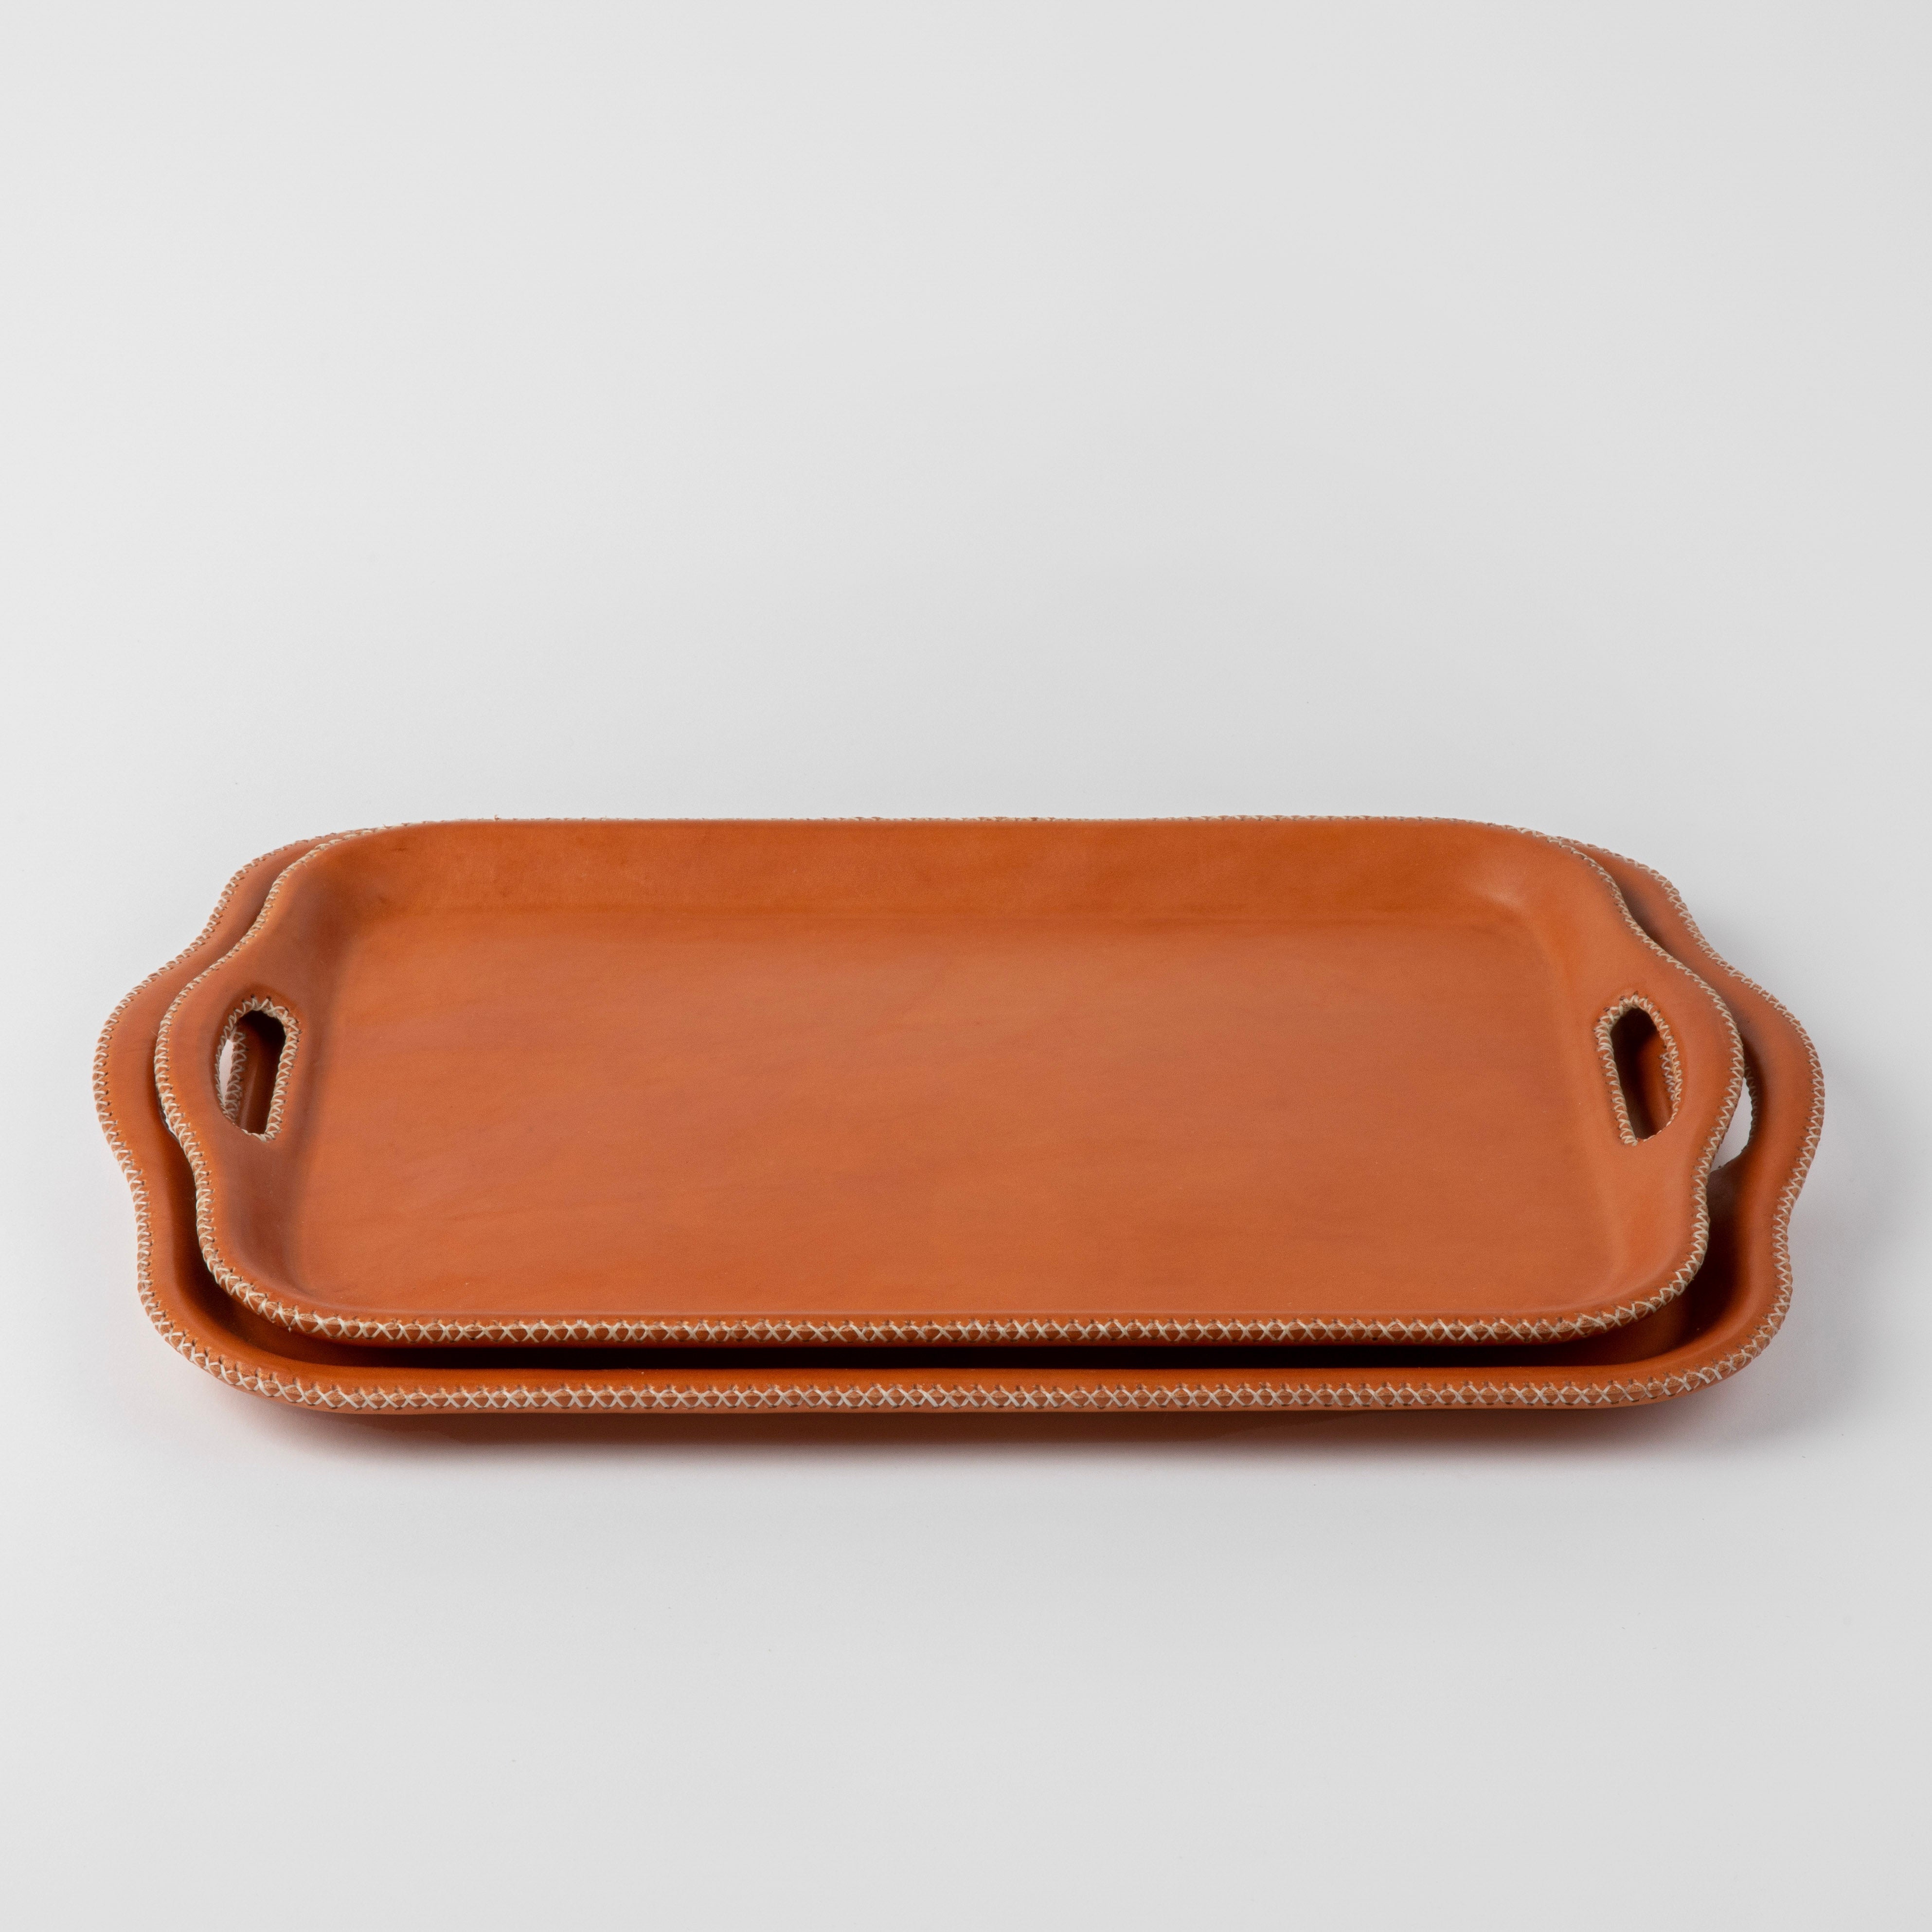 Gíron Nesting Leather Tray, Natural